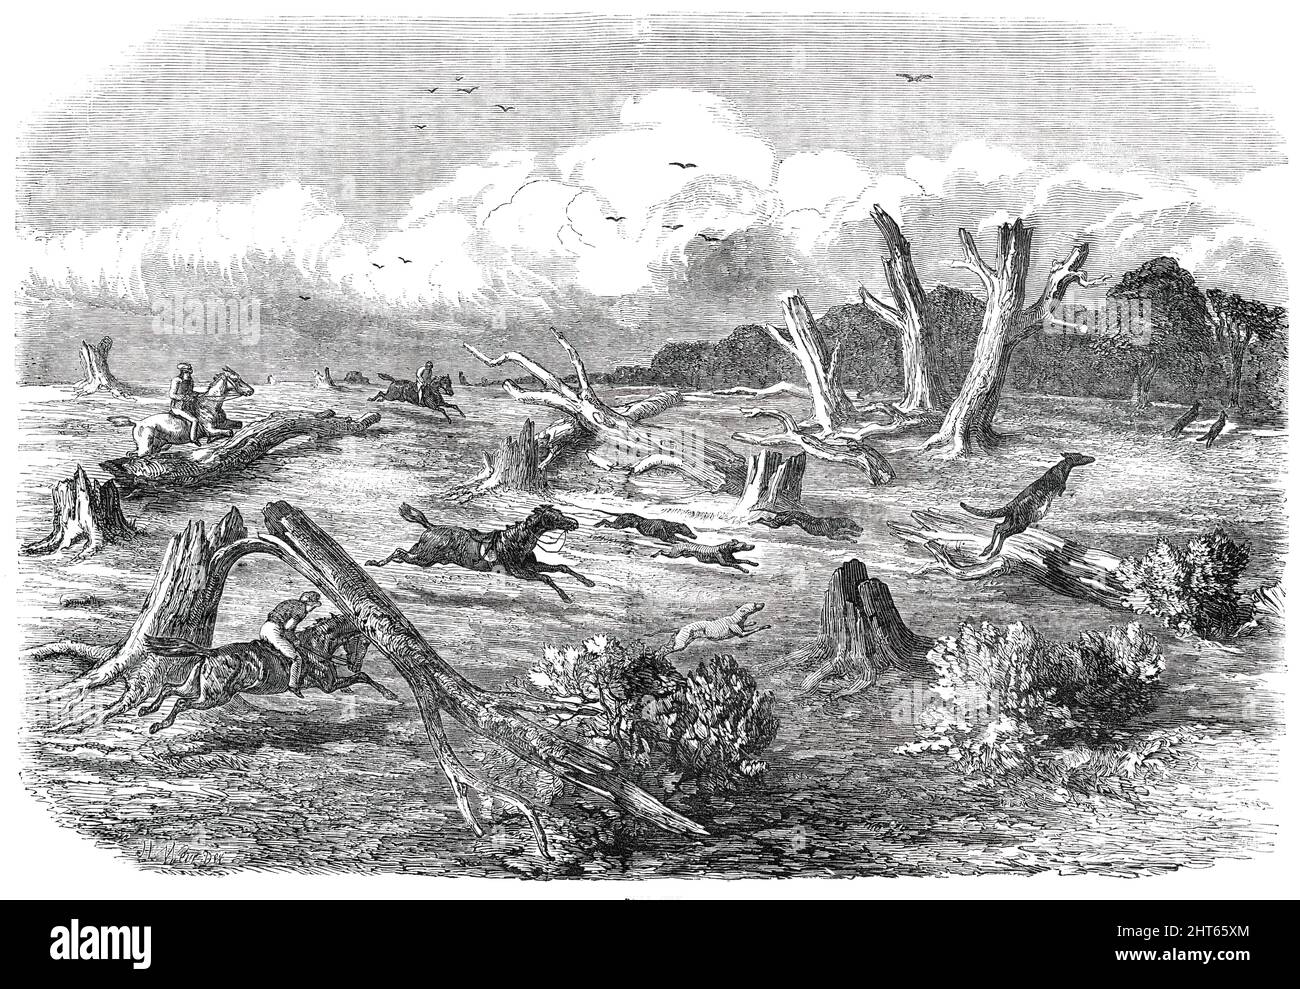 Full Cry, 1850. Kangaroo-hunting: '...the favourite colonial sport of Australia...the full chase, with its adventurous character across a half-cleared country; in which the flying leaps of the kangaroo are by no means exaggerated...'. Scene '...from the Sketch-book of a Settler, who was so struck with the novelty of the chase, that he has attempted to portray a few of its oddities...These timid creatures, which we disturbed while they were feeding, immediately took to the desert; and many a famous chase we had after them, over gum bushes and the rough surface of the loose limestone rocks. It i Stock Photo